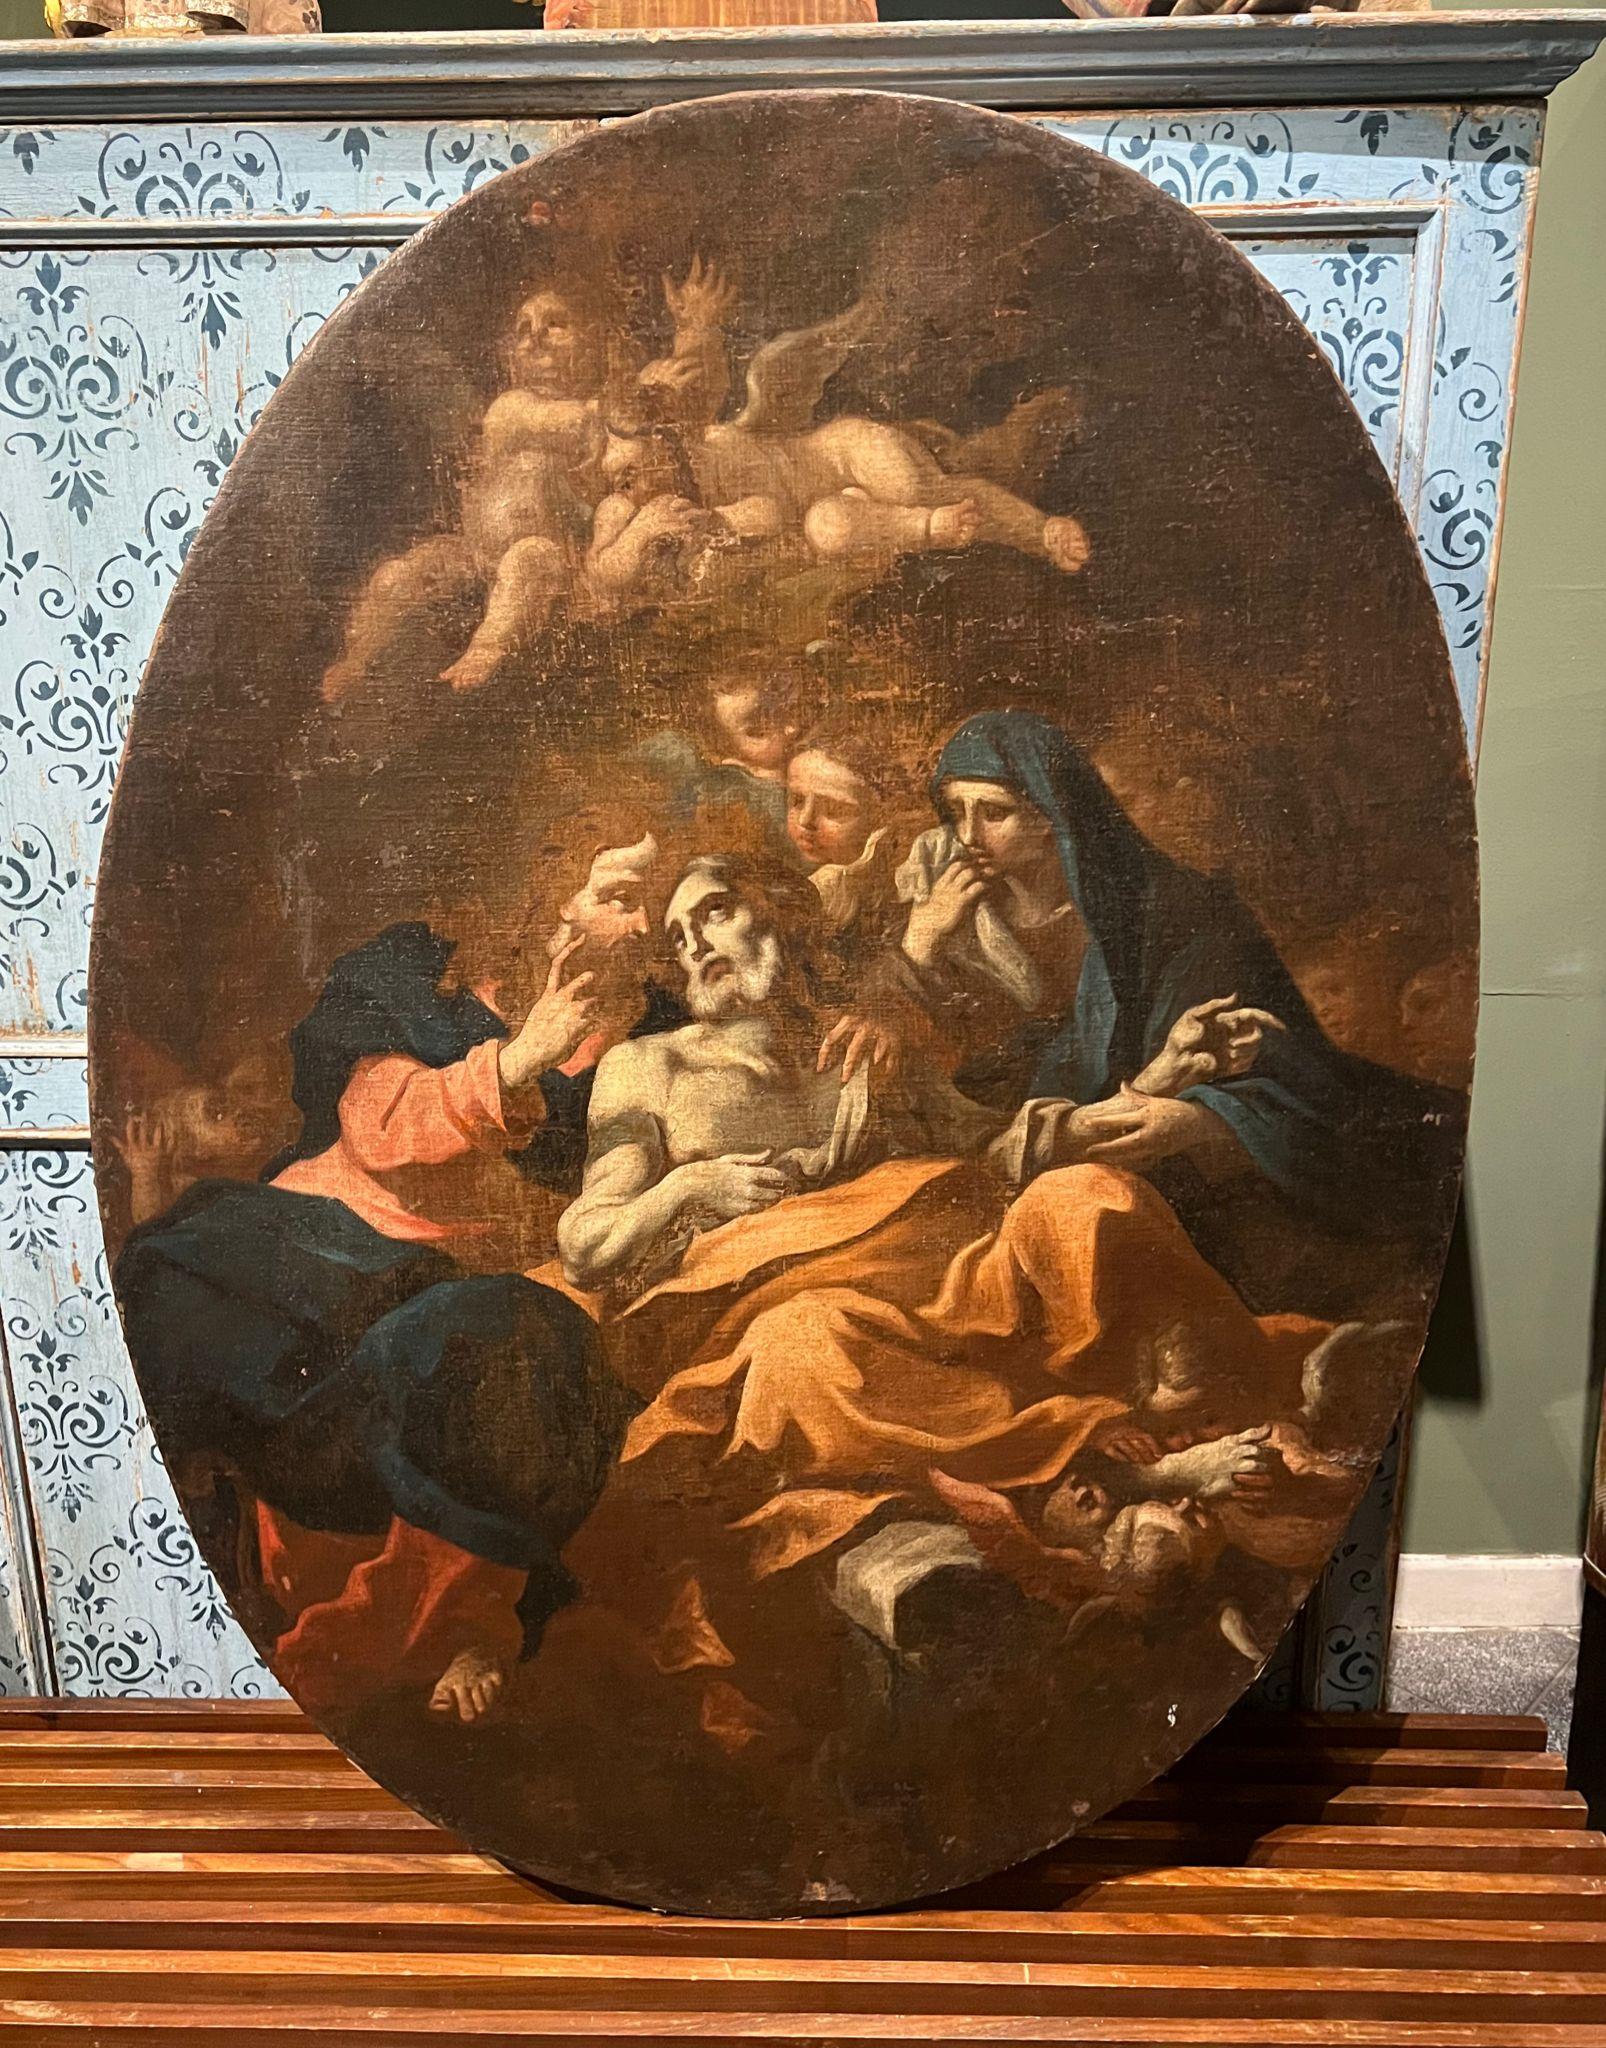 Oil painting on canvas depicting Christ and the Madonna consoling a dying man, Emilian school, 17th century.